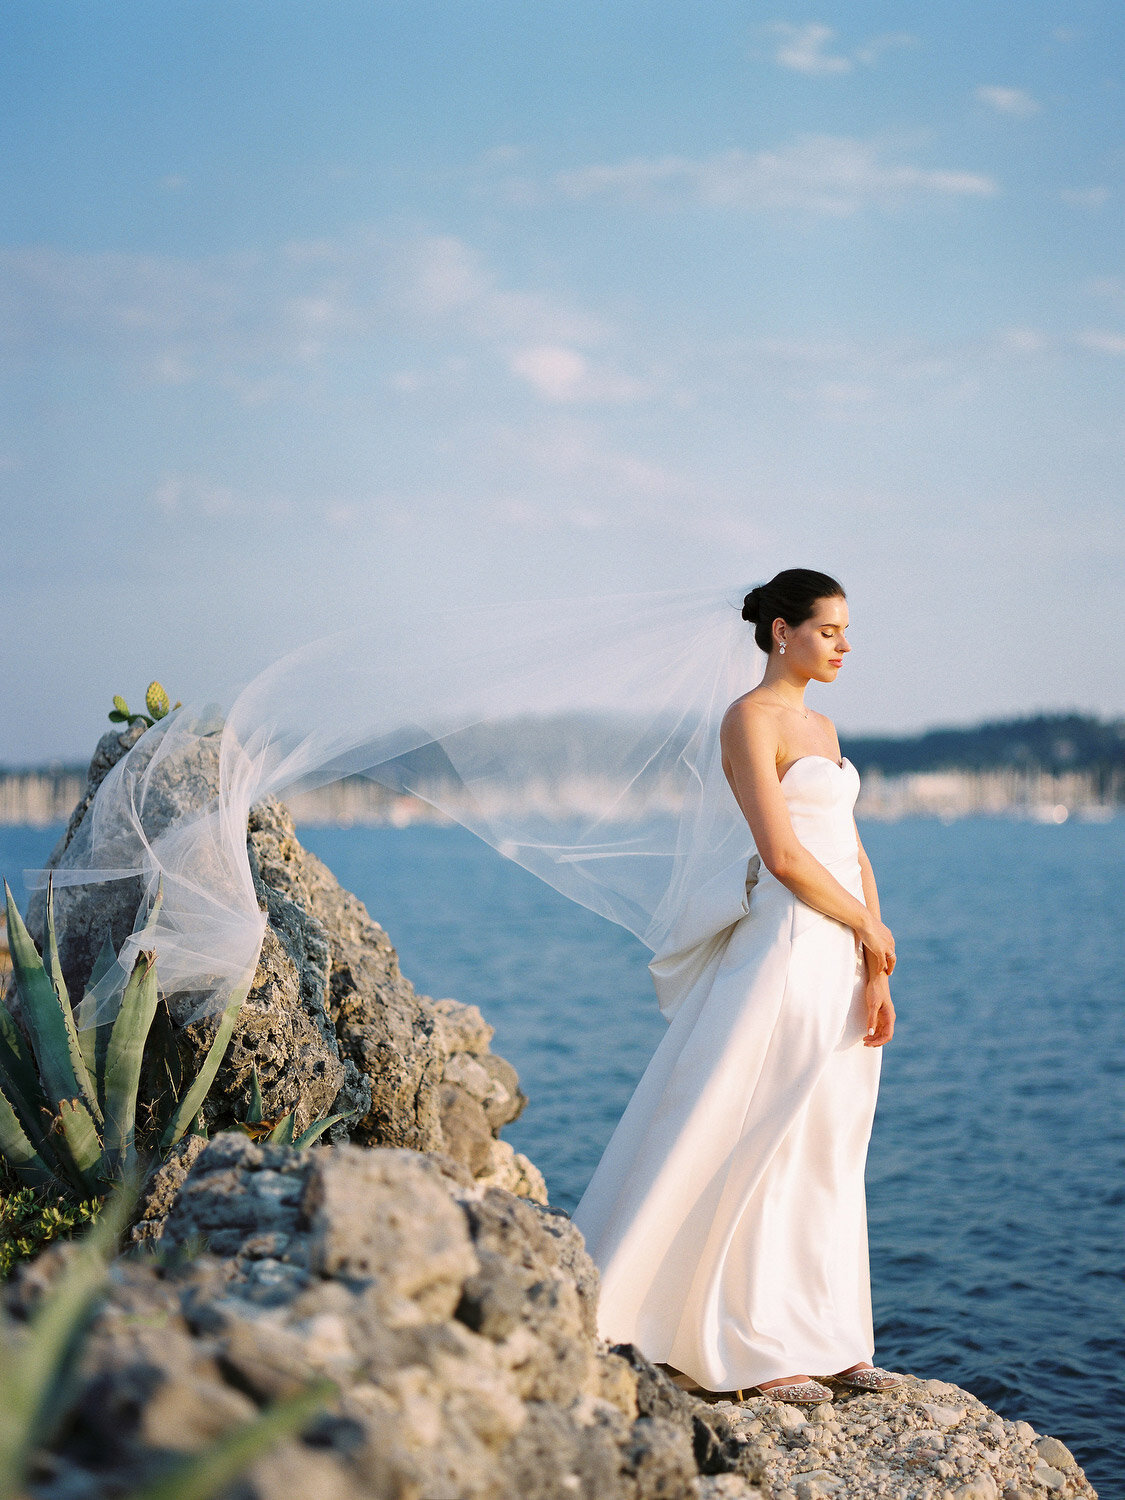 Greece-film-wedding-photography-by-Kostis-Mouselimis_070